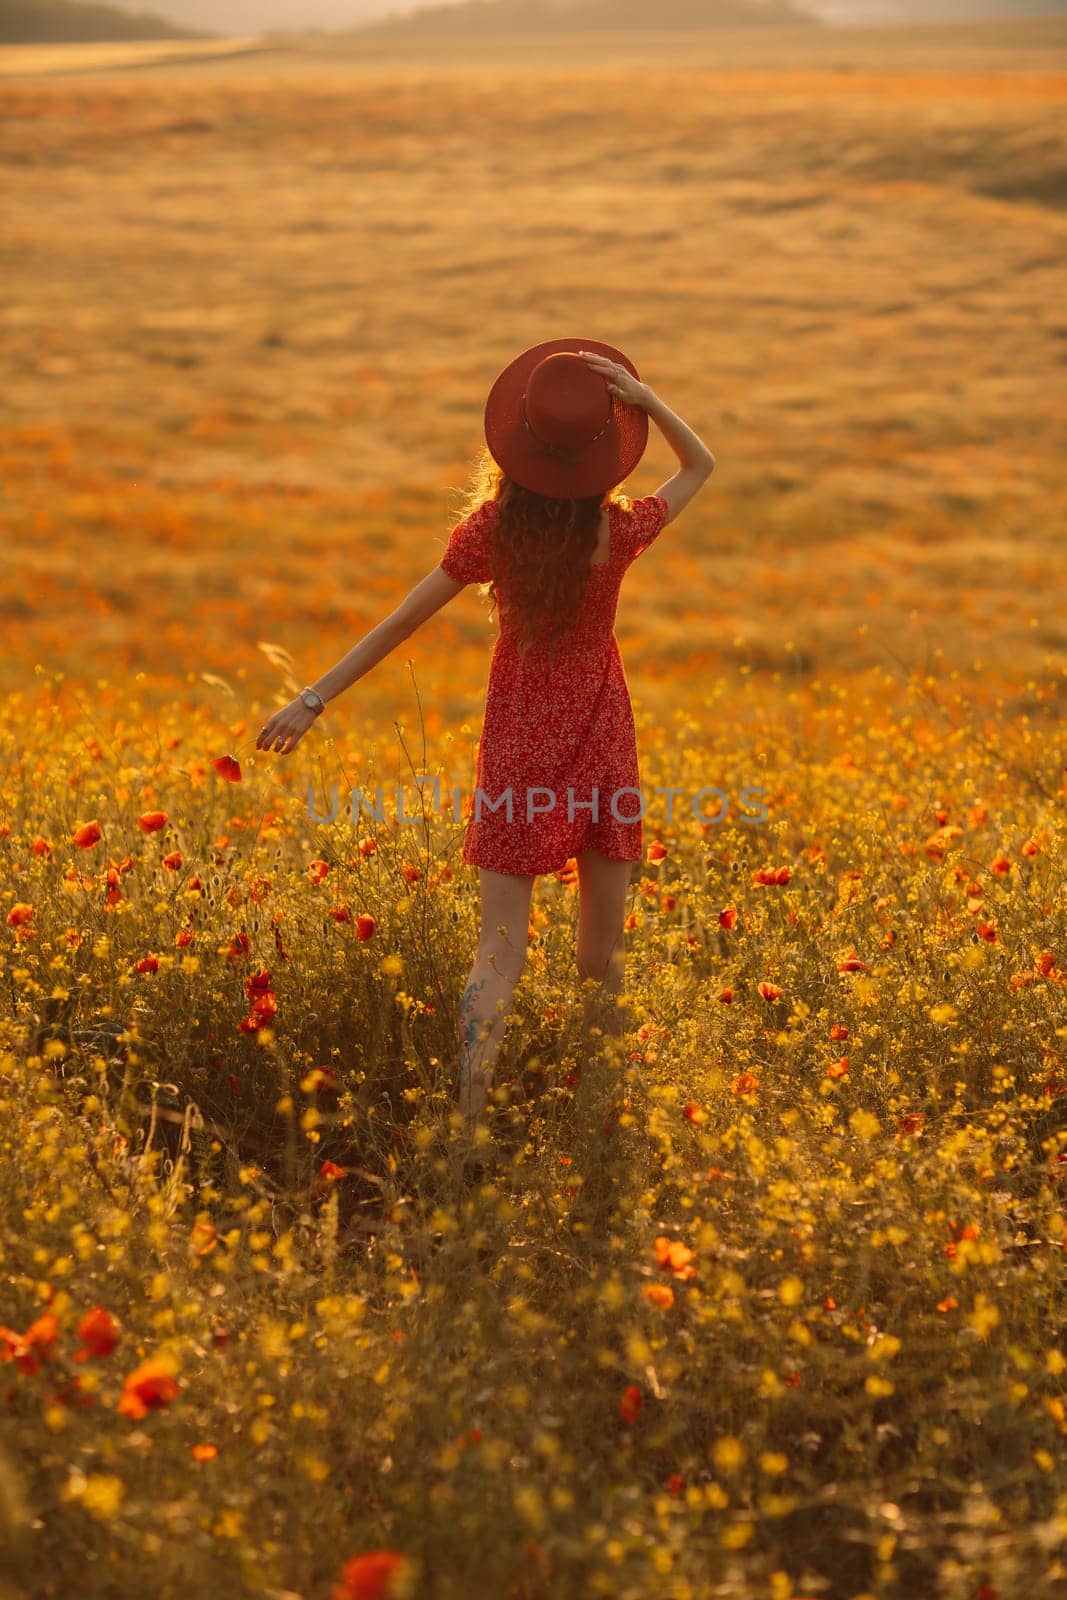 A woman in a red dress stands in a field of yellow flowers. She is wearing a red hat and has her hand up in the air. The scene is peaceful and serene, with the woman enjoying the beauty of the flowers